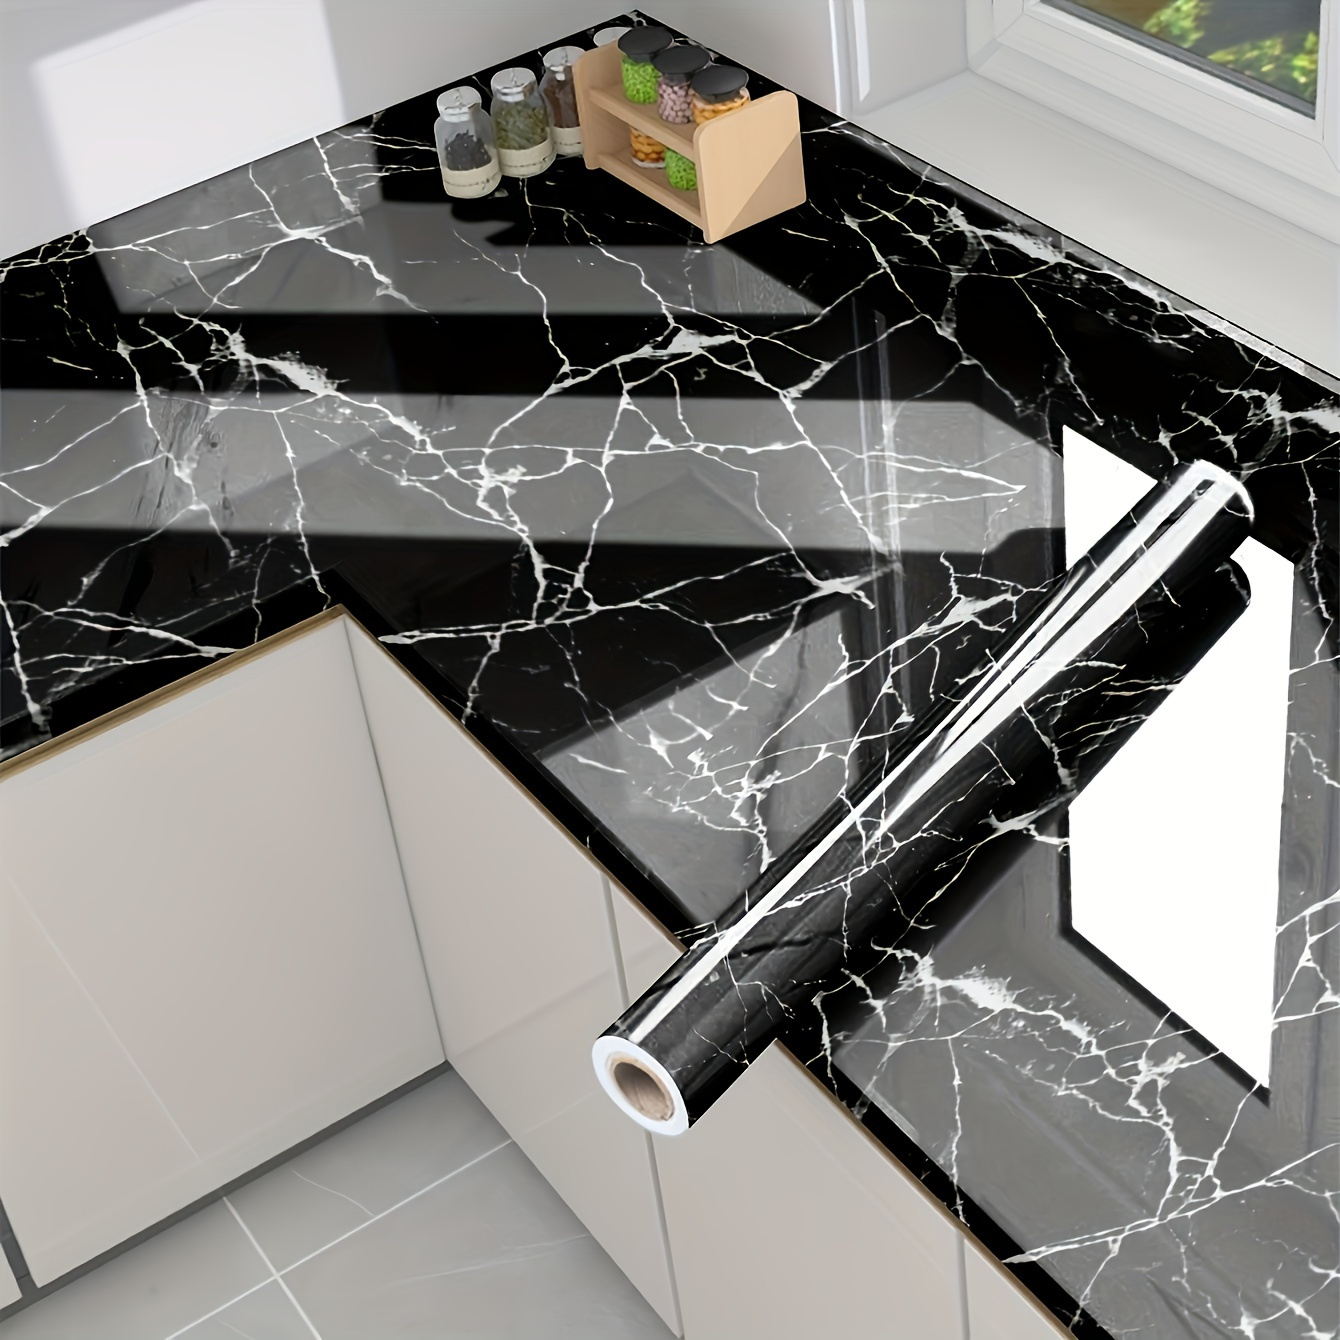 

Black Marble Self-adhesive Wallpaper Roll - Waterproof & Oil-resistant, Perfect For Kitchen Countertops, Tiles, Cabinets & Dining Table Makeover